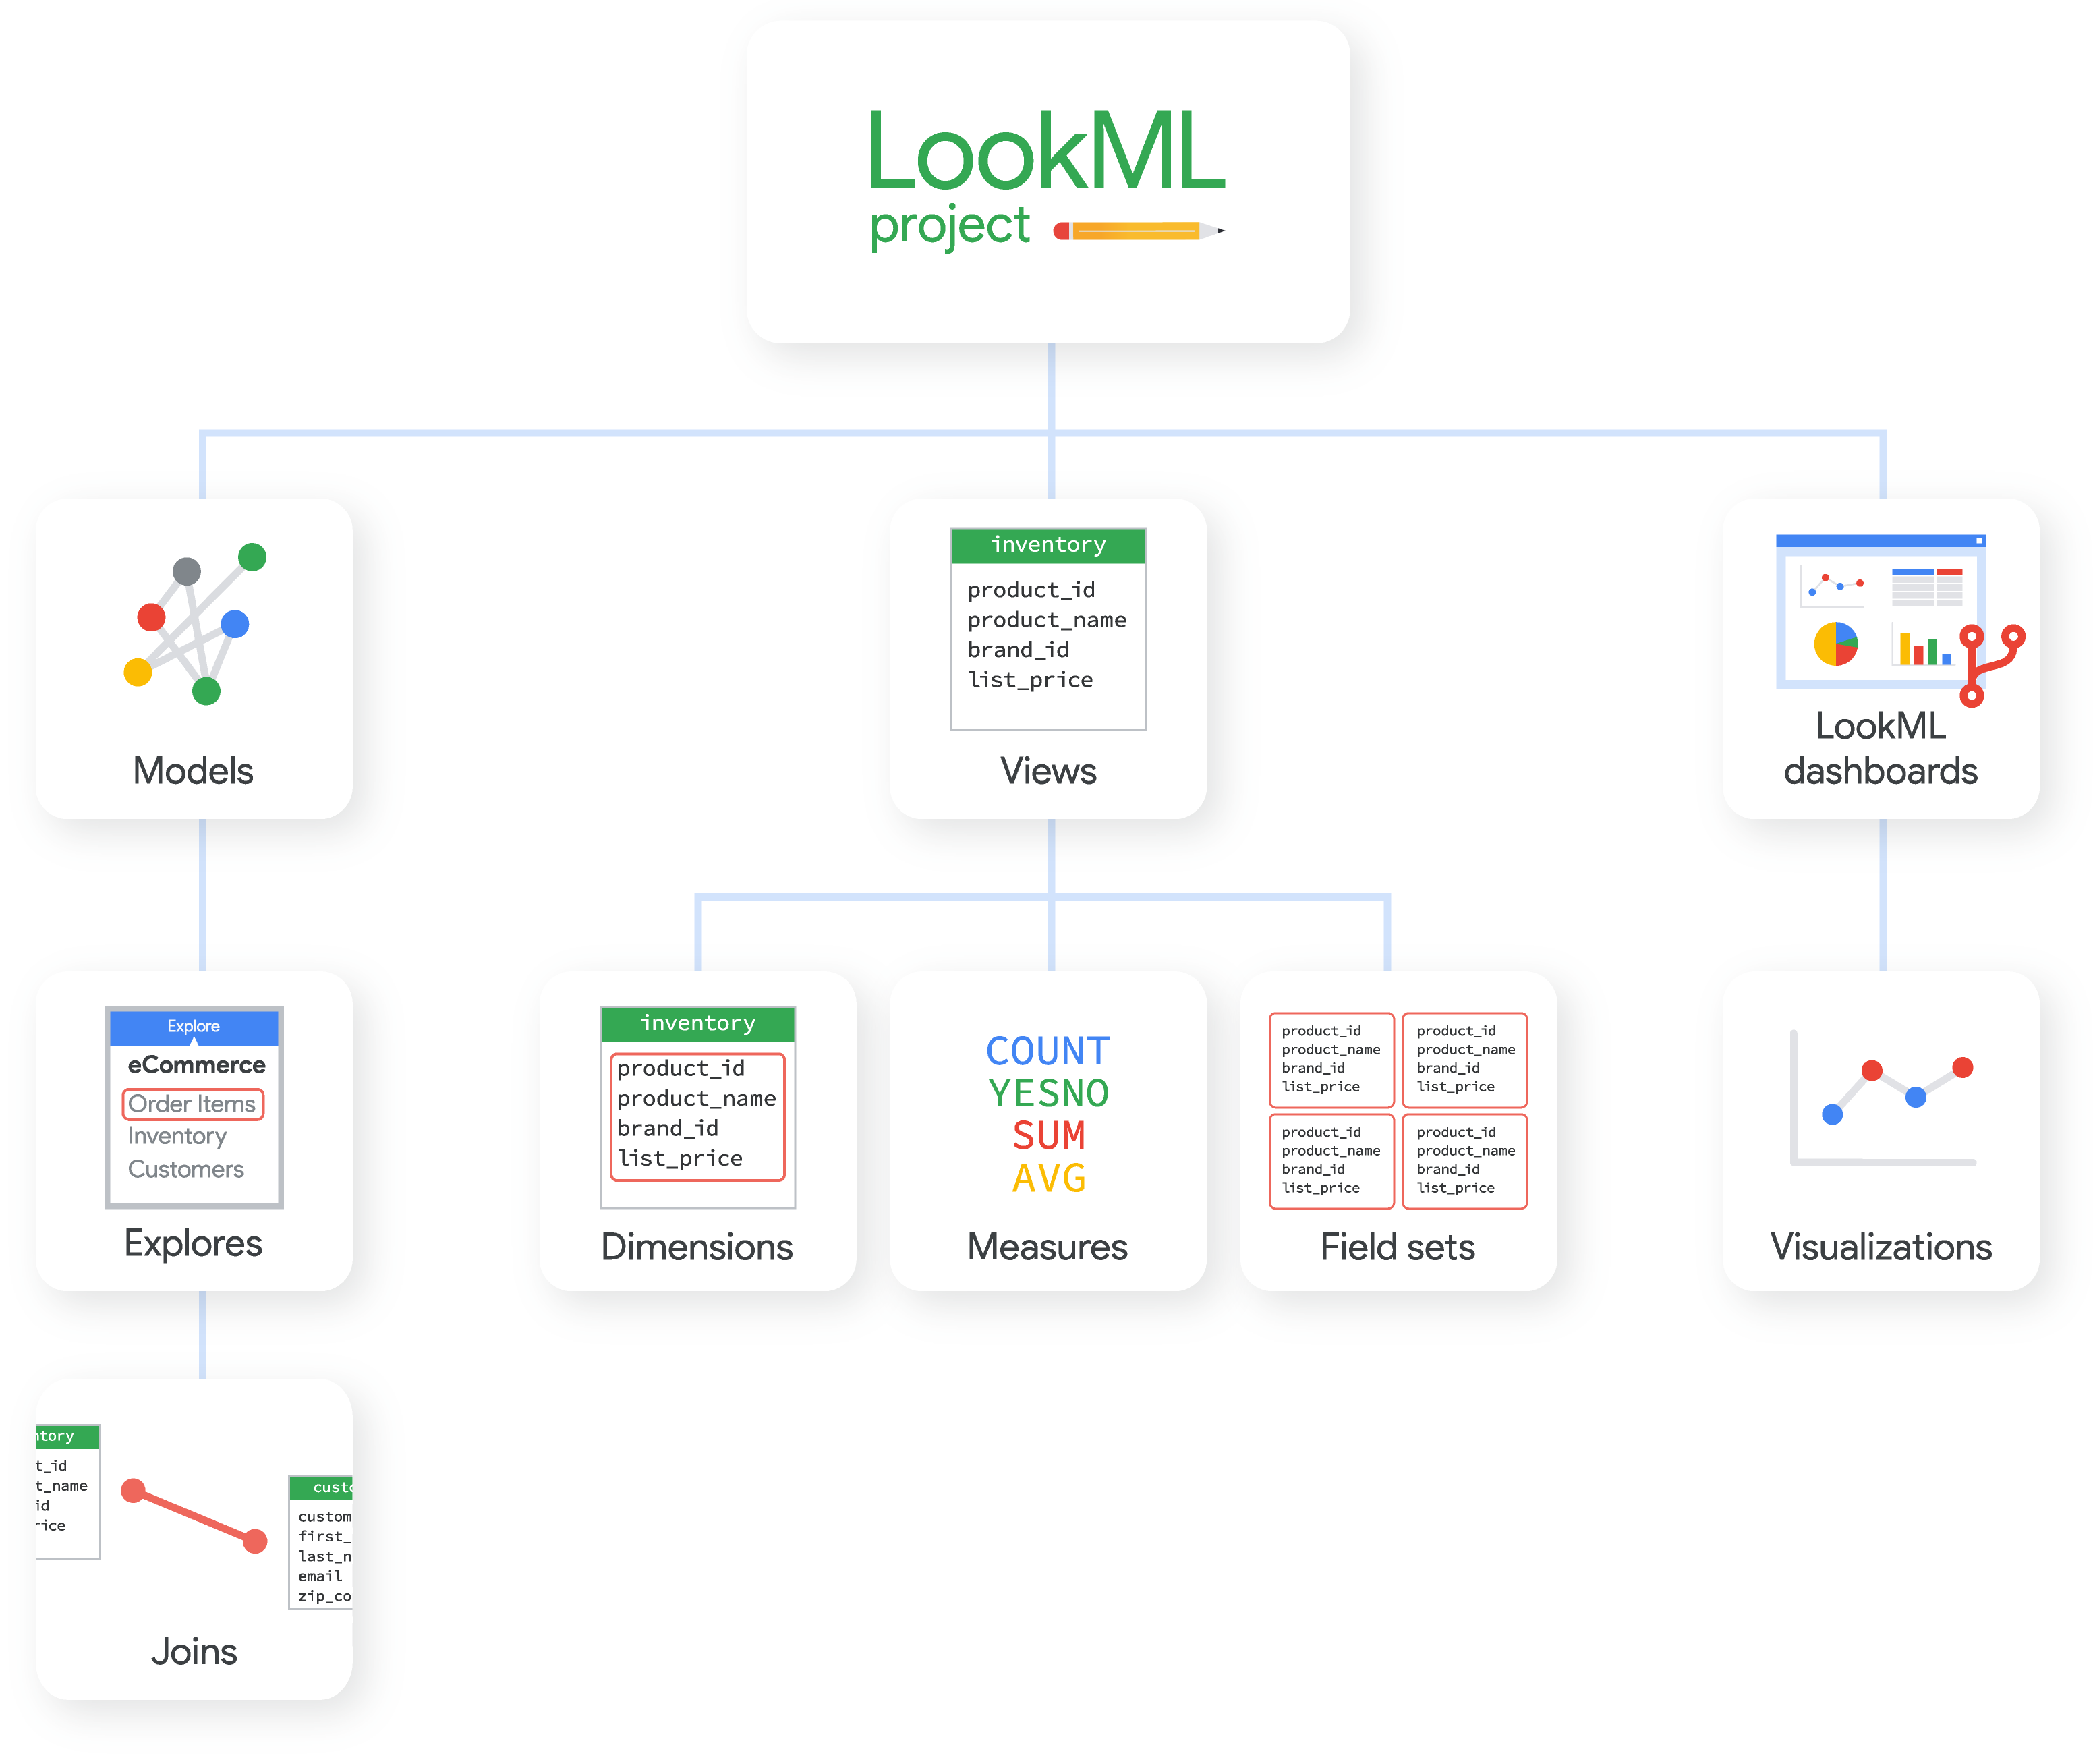 A LookML project can contain models, views, and LookML dashboards, each of which is made up other LookML elements.